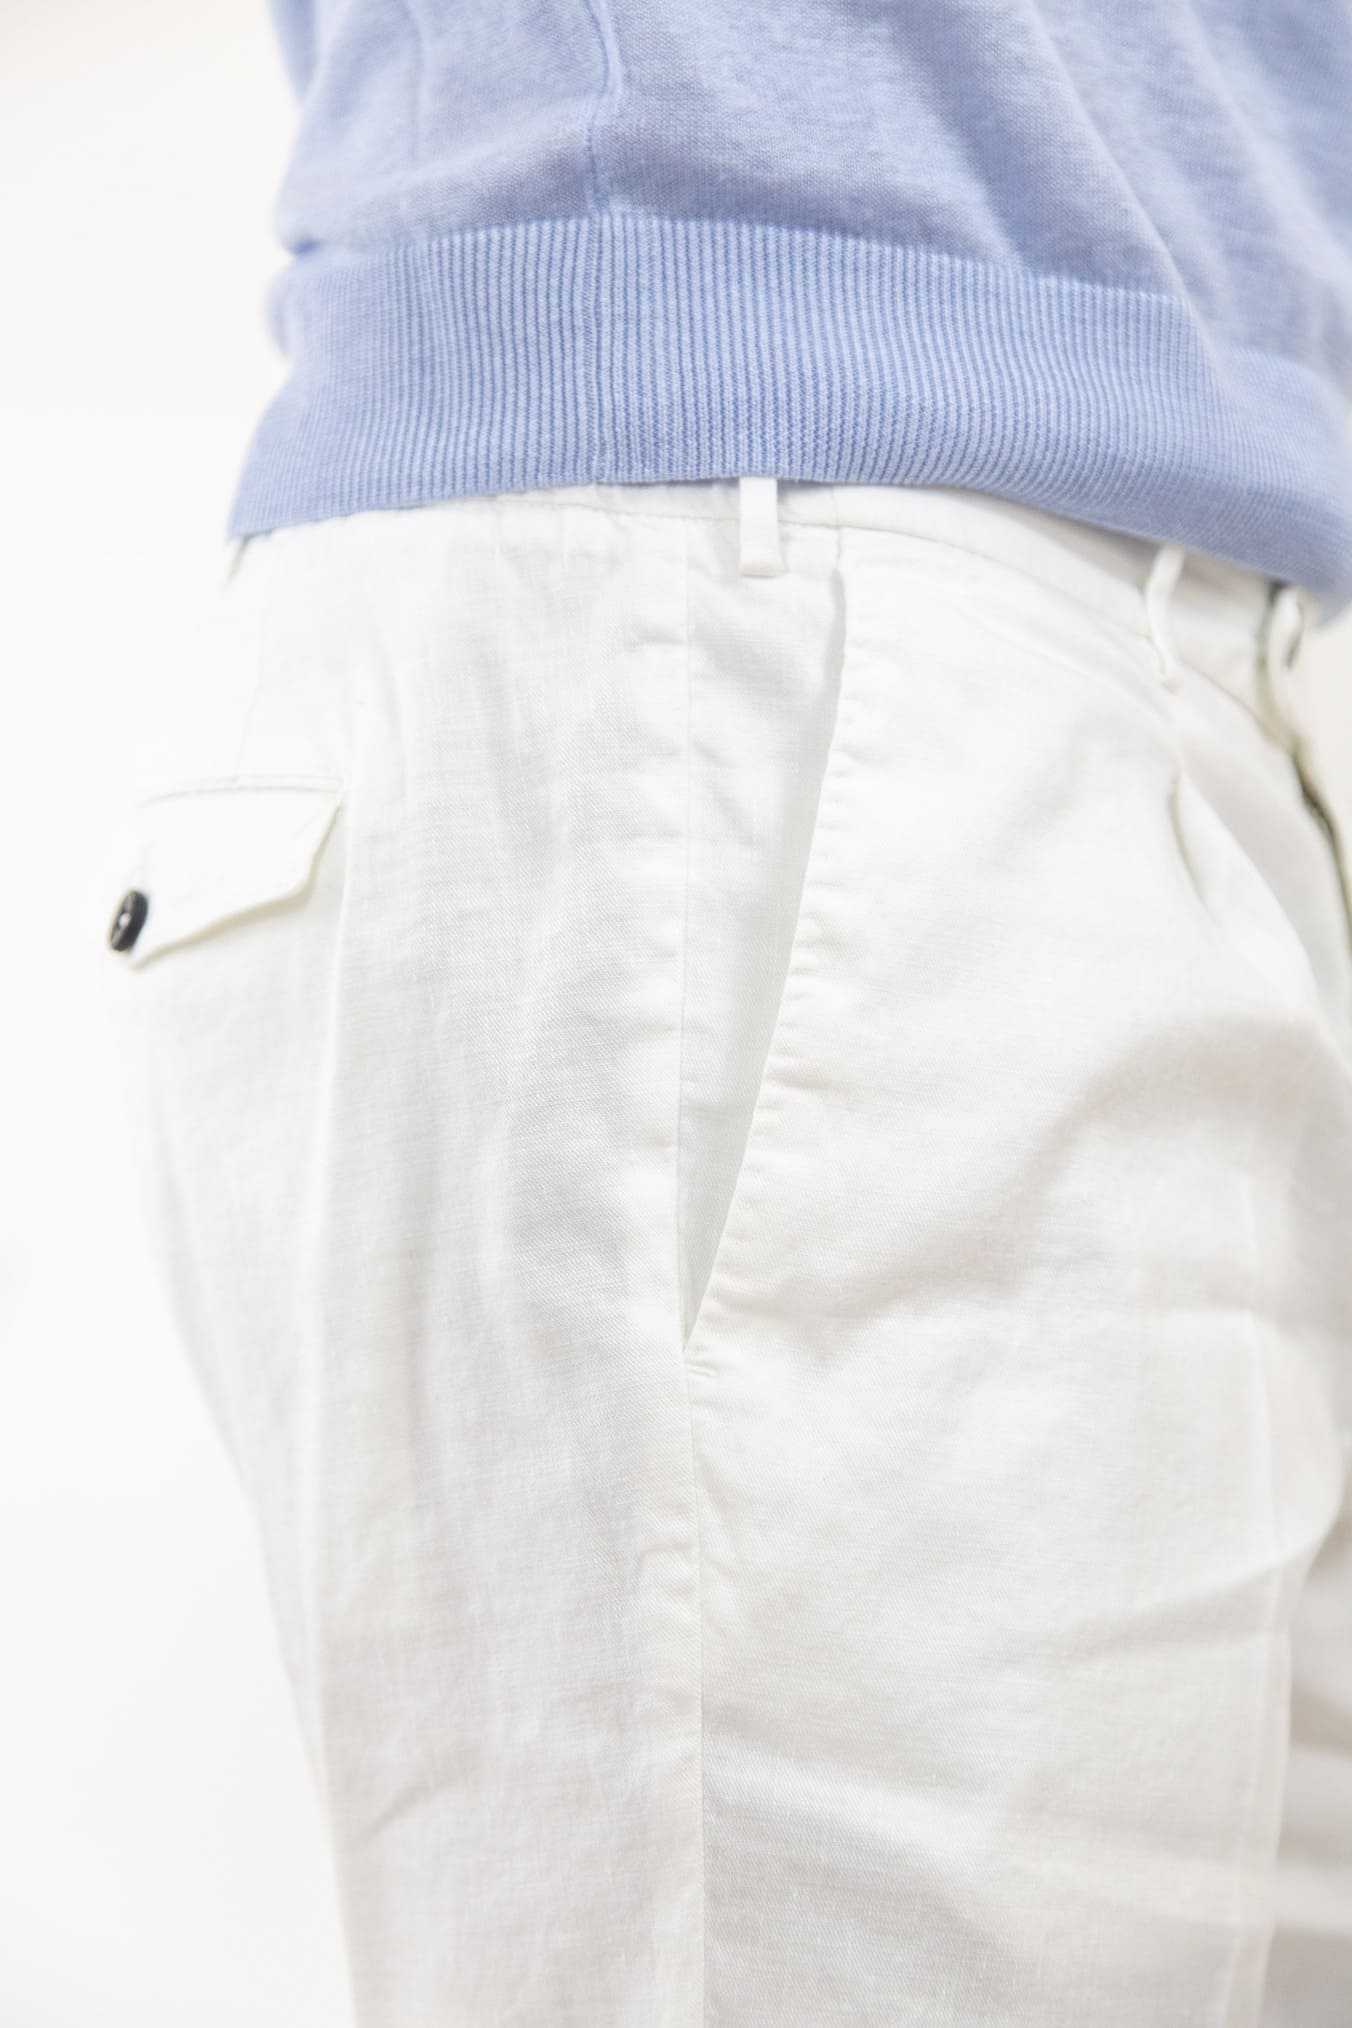 PT Bermuda shorts with pleats and removable drawstring in white linen and cotton